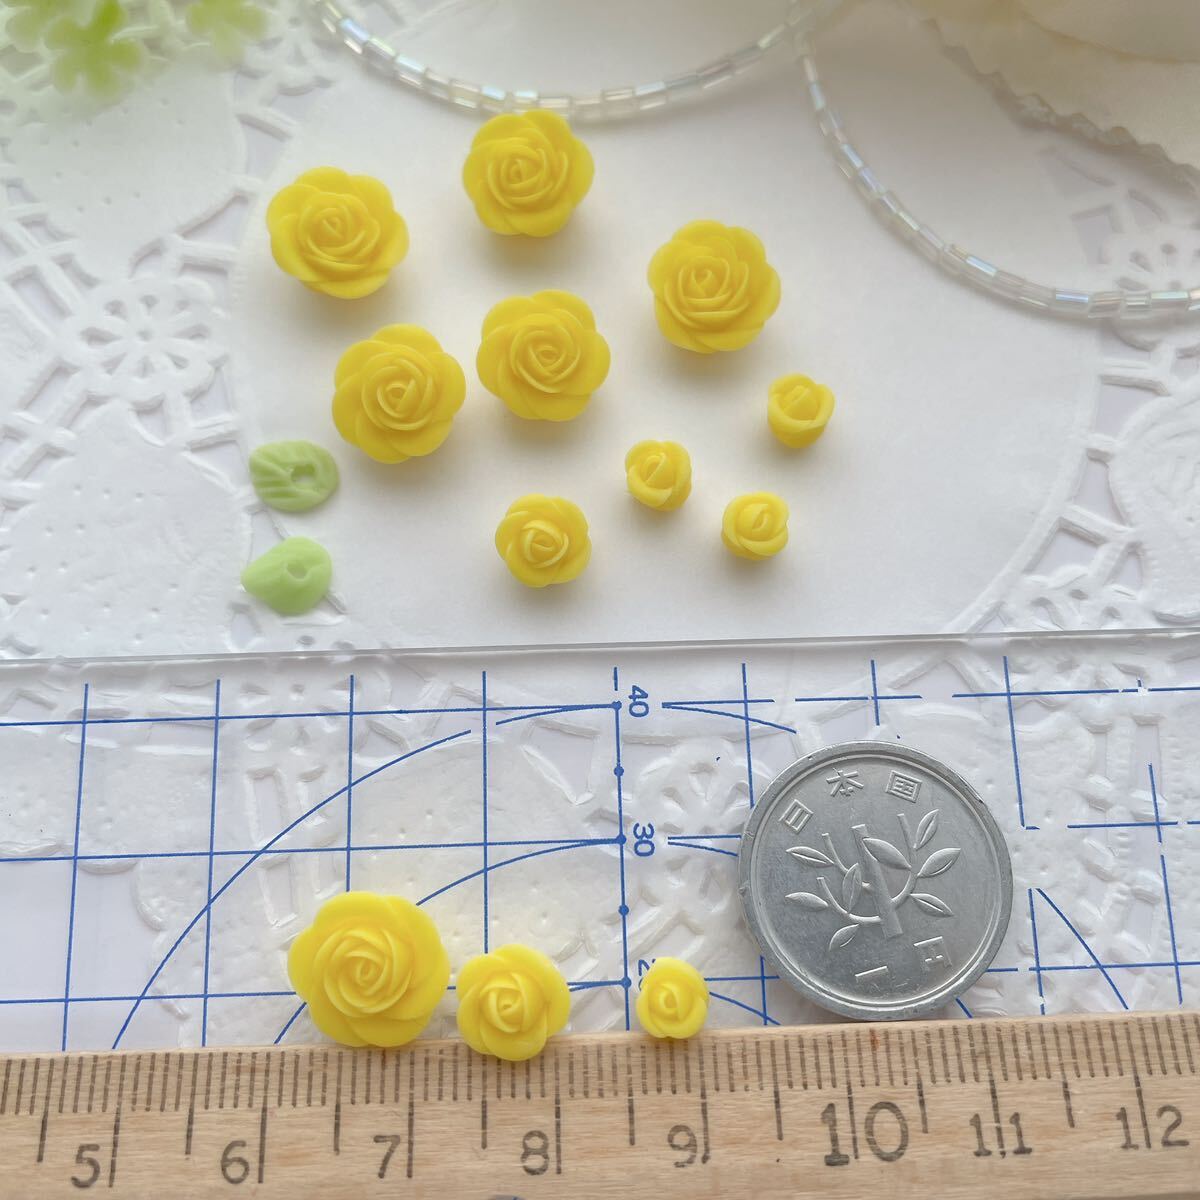  rose parts hand made accessory raw materials material flower rose yellow color rose resin clay 2